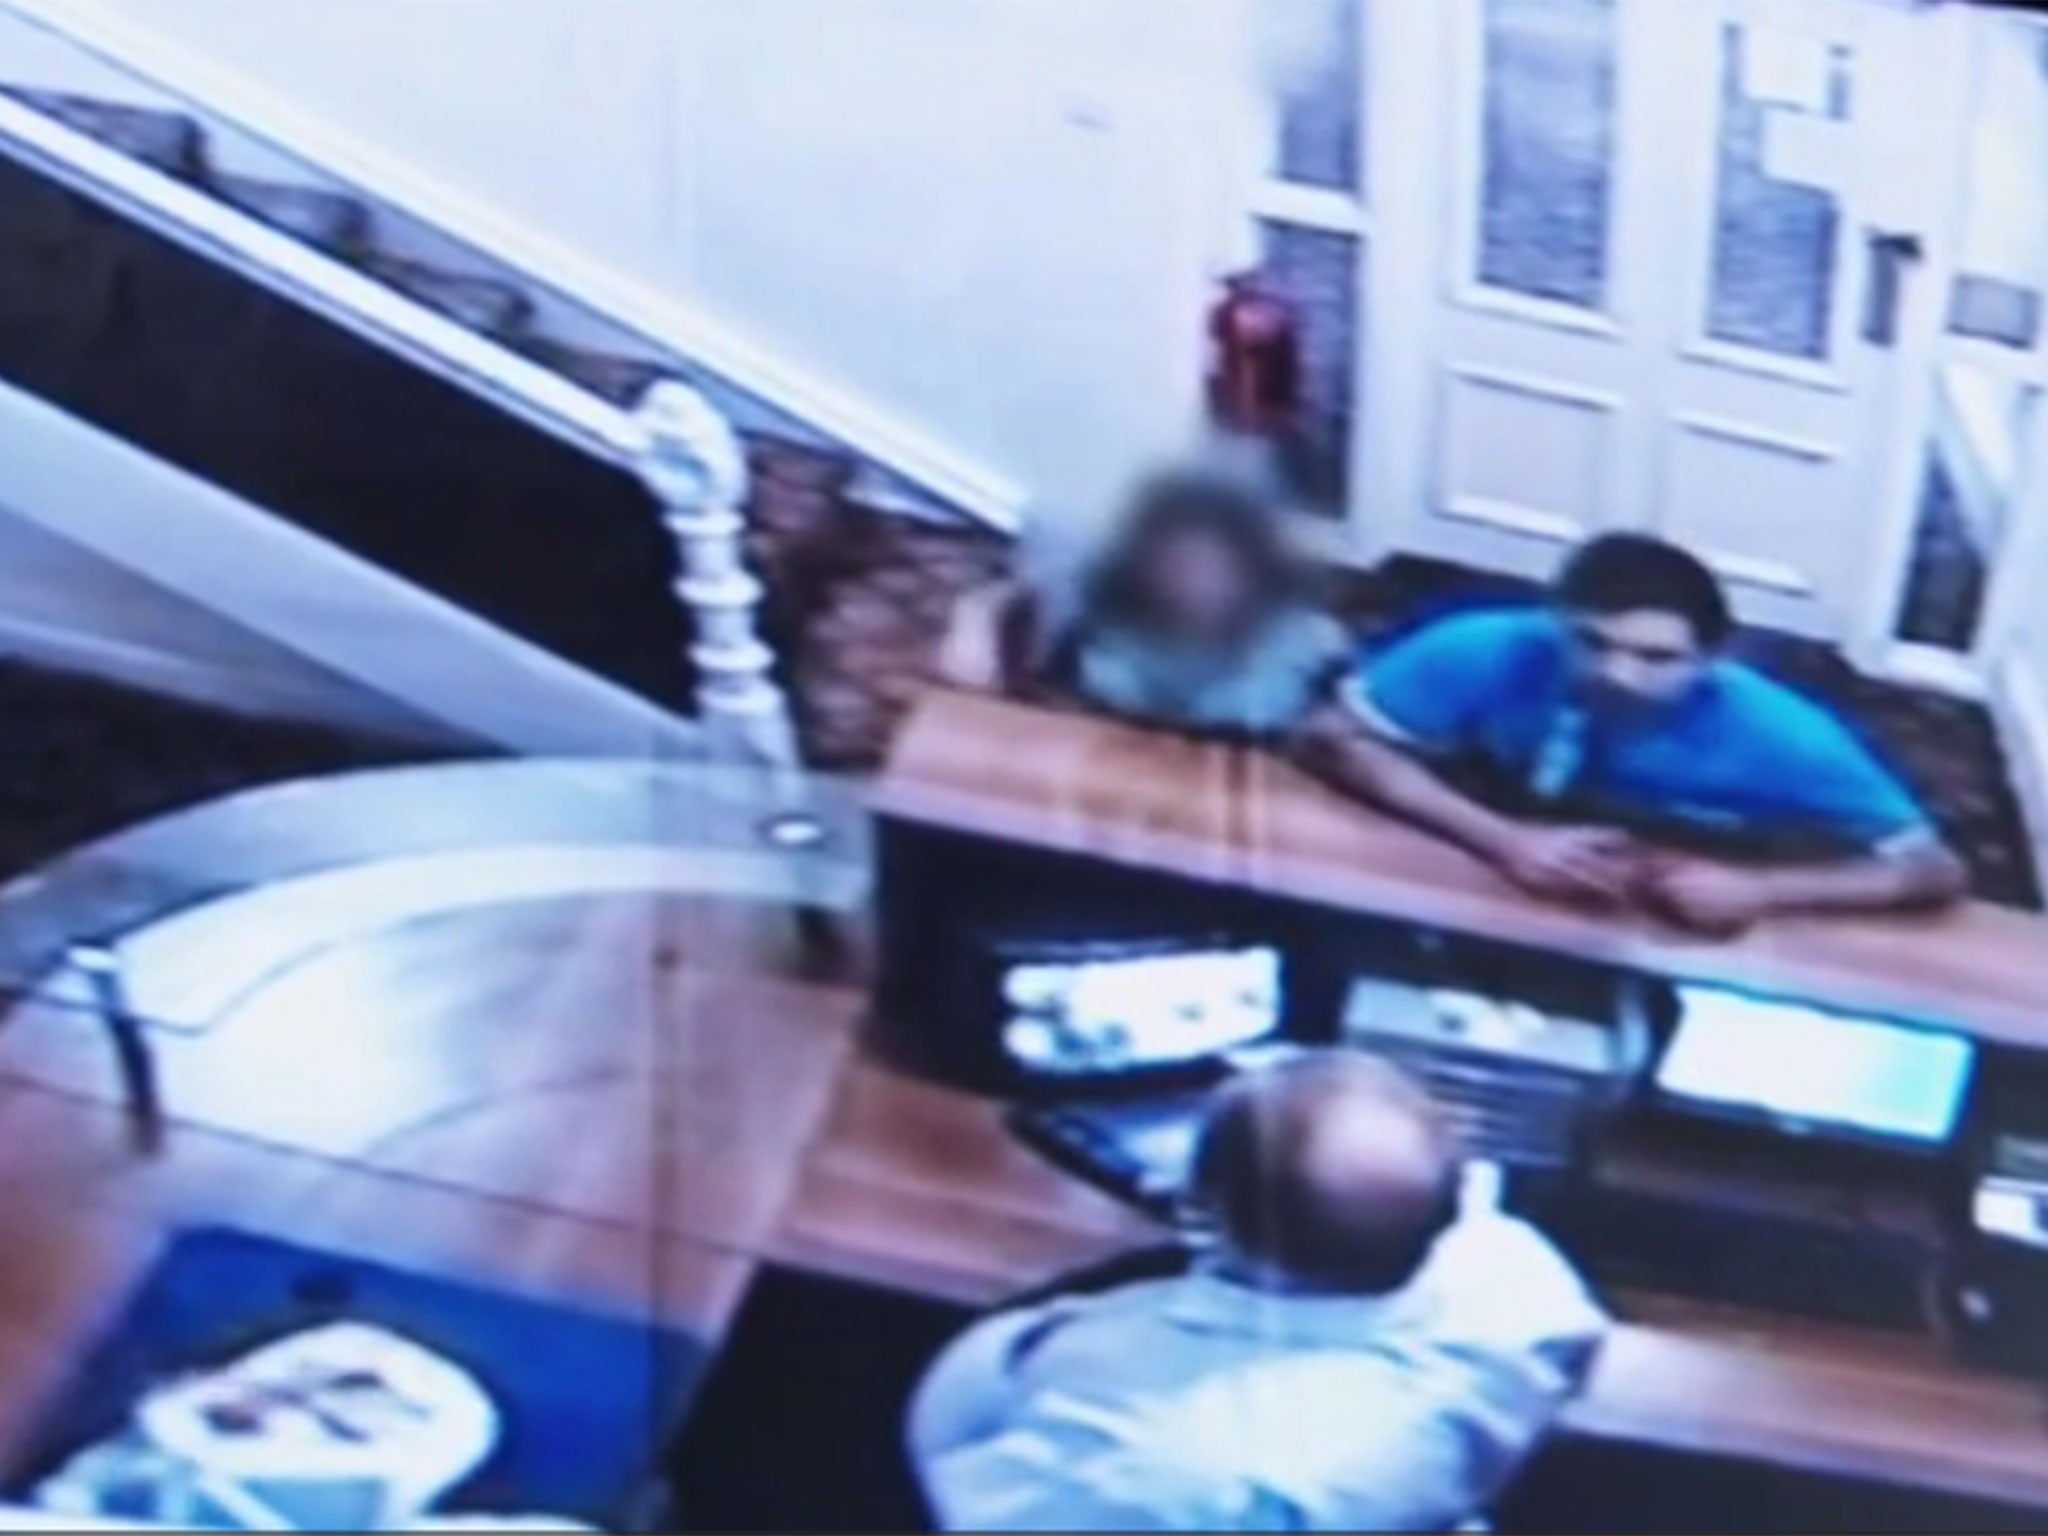 CCTV footage shows the 13-year-old in a hotel lobby with an Asian man